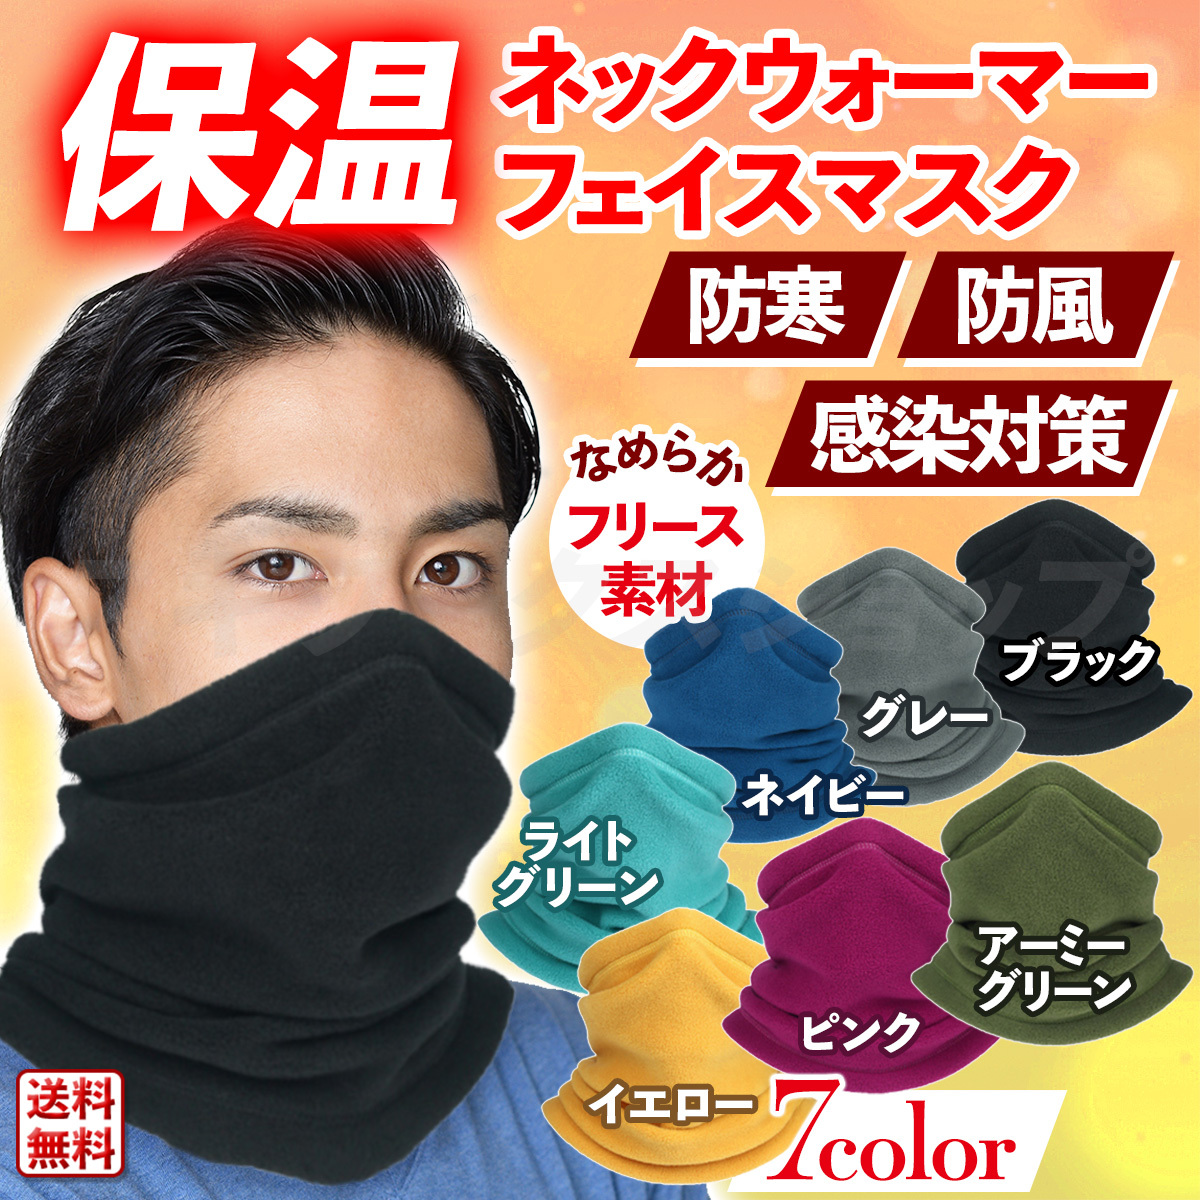  protection against cold face mask neck warmer outdoor bike Delivery fishing sunburn prevention man and woman use 